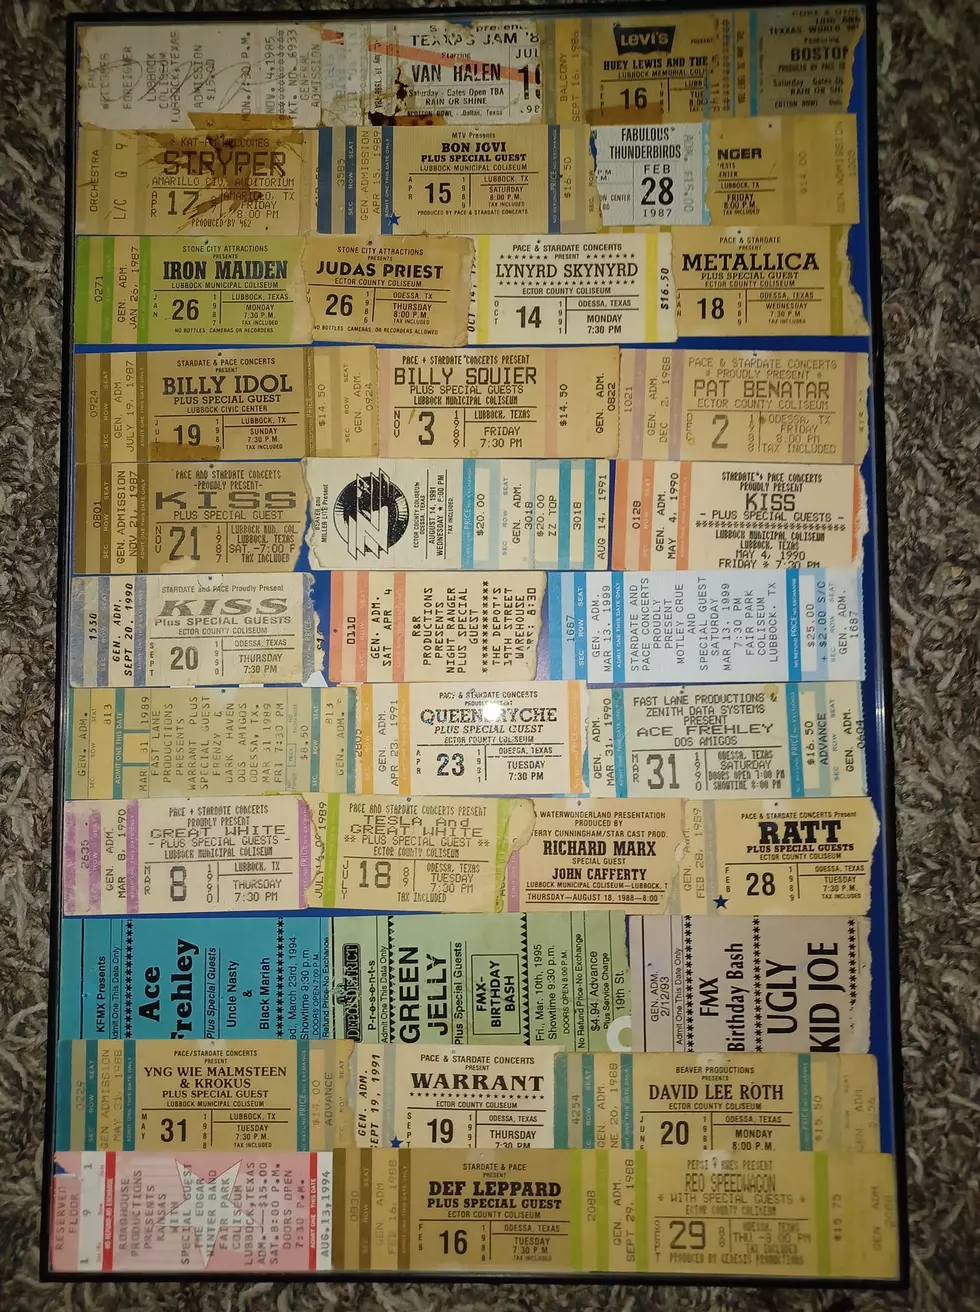 Check Out This Awesome Collection of Lubbock Concert Tickets